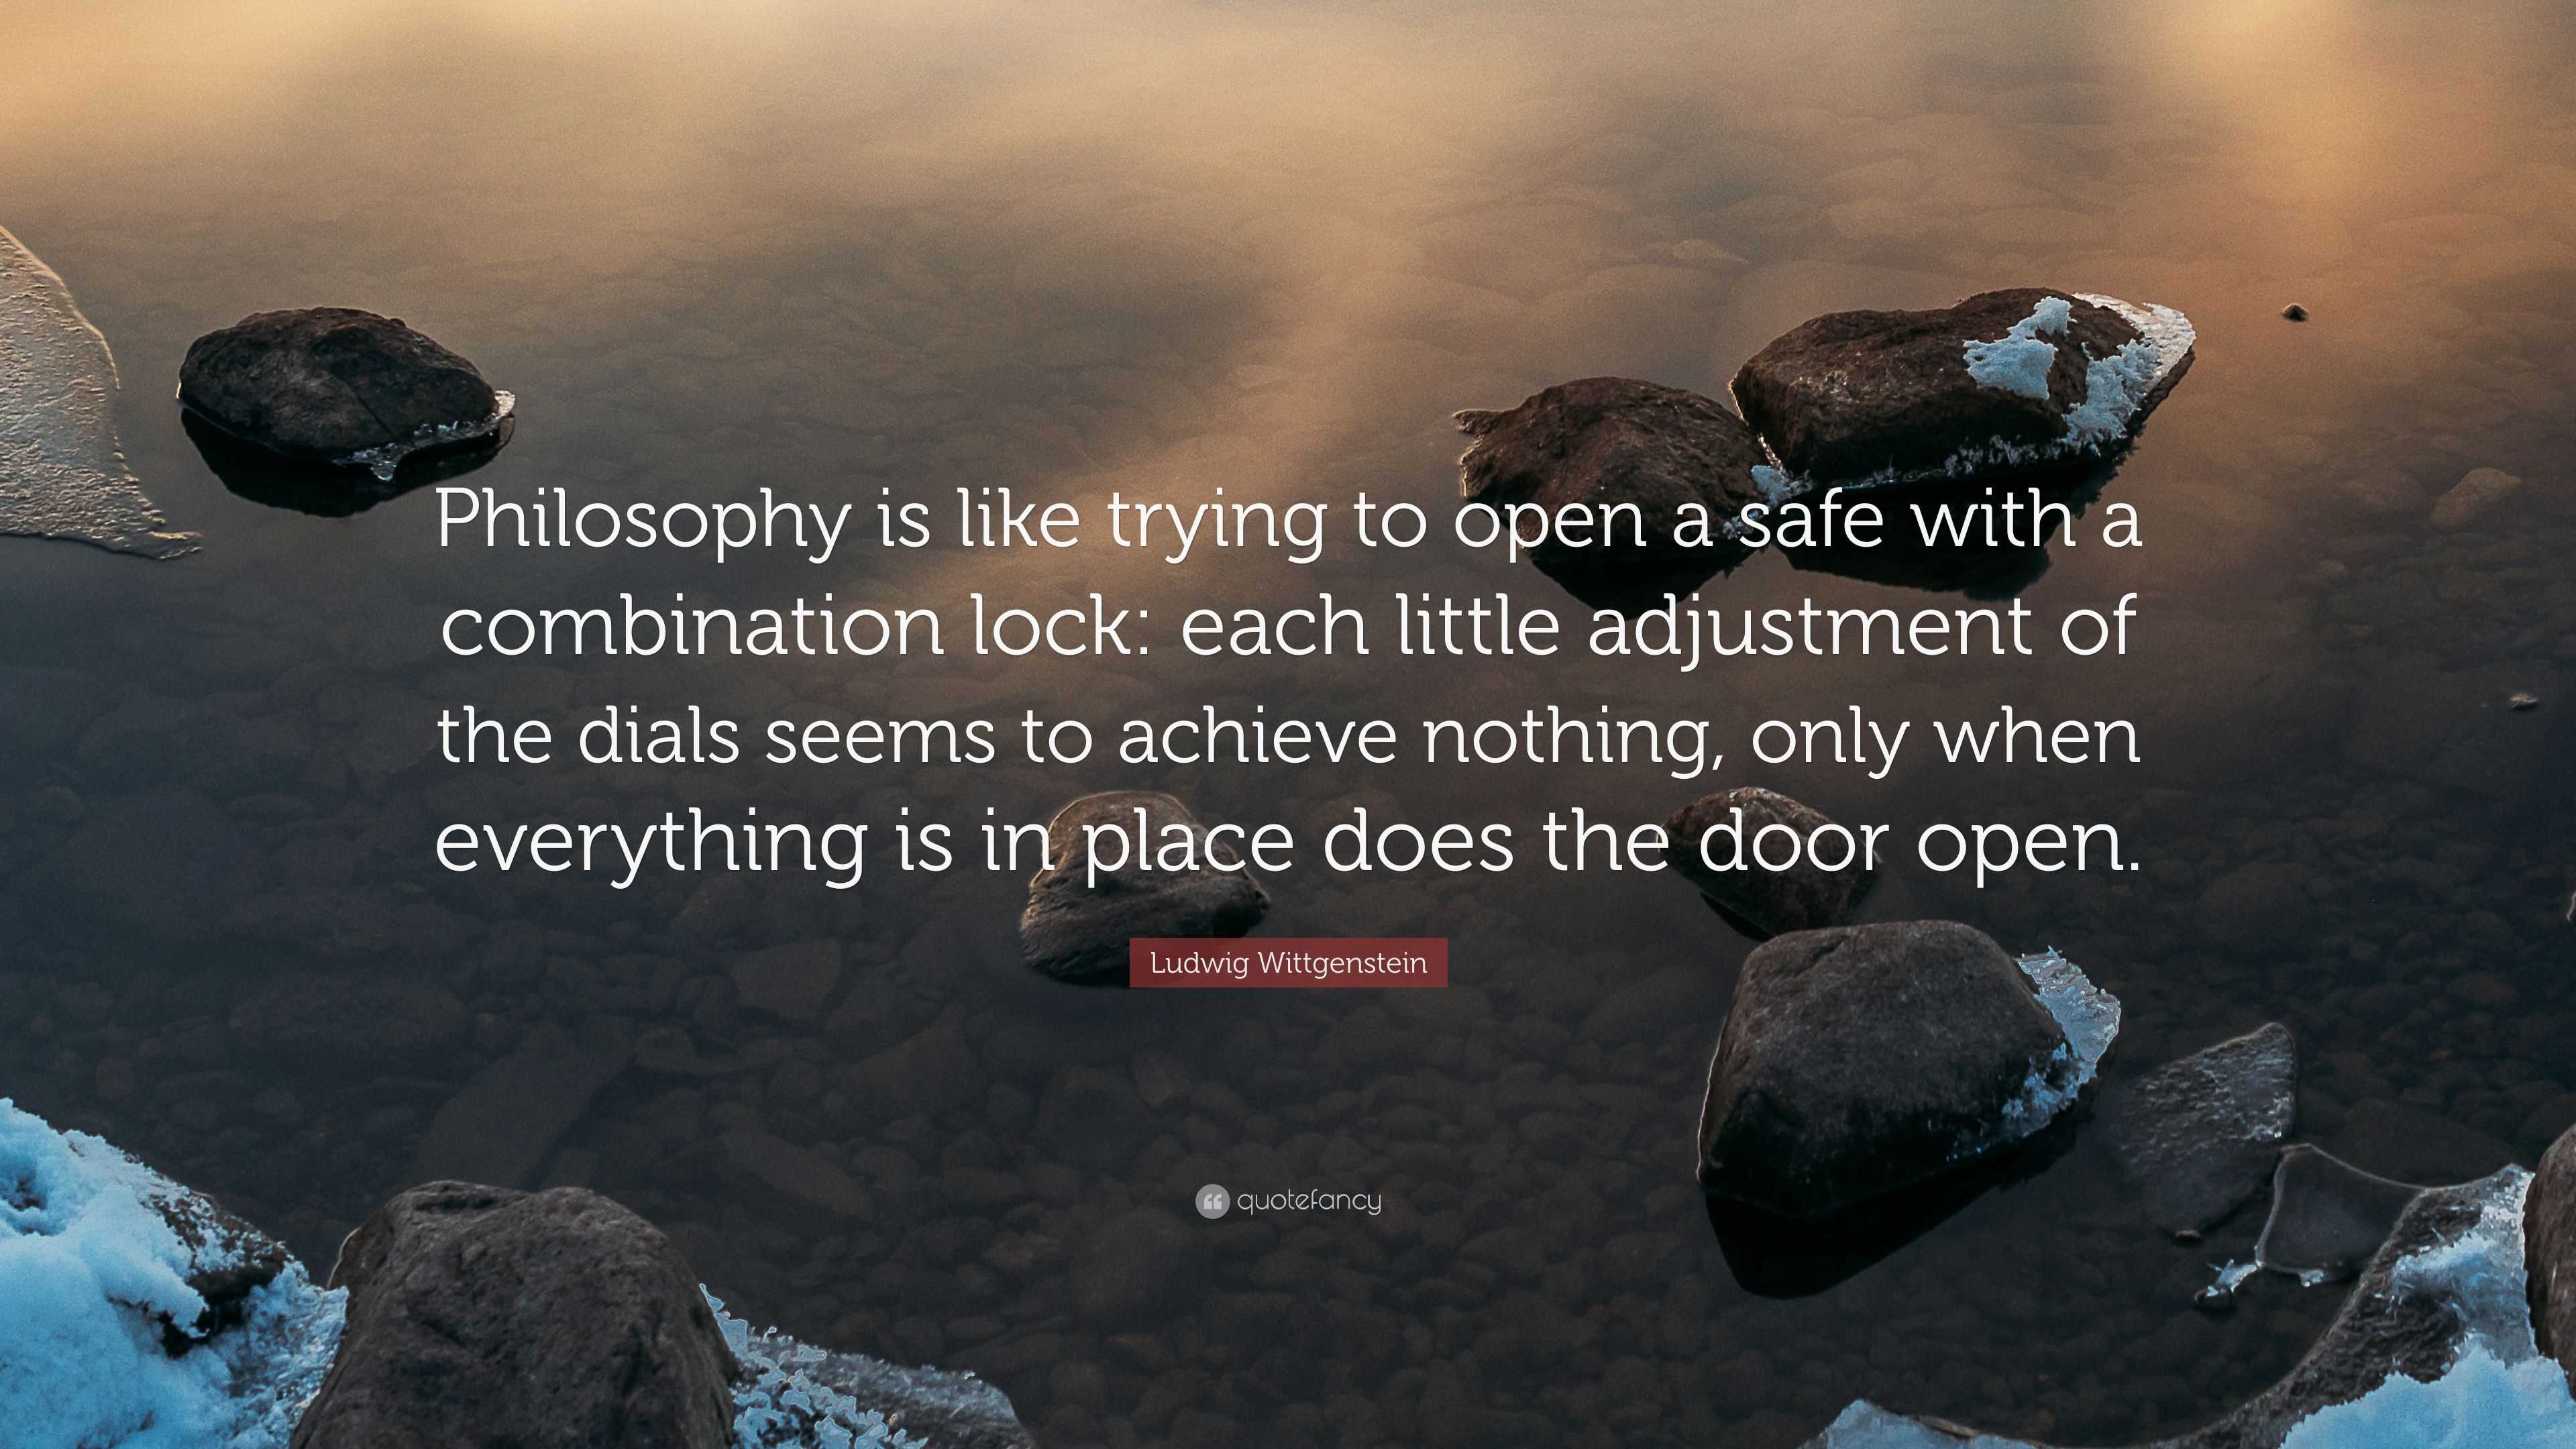 Ludwig Wittgenstein Quote: “Philosophy is like trying to open a